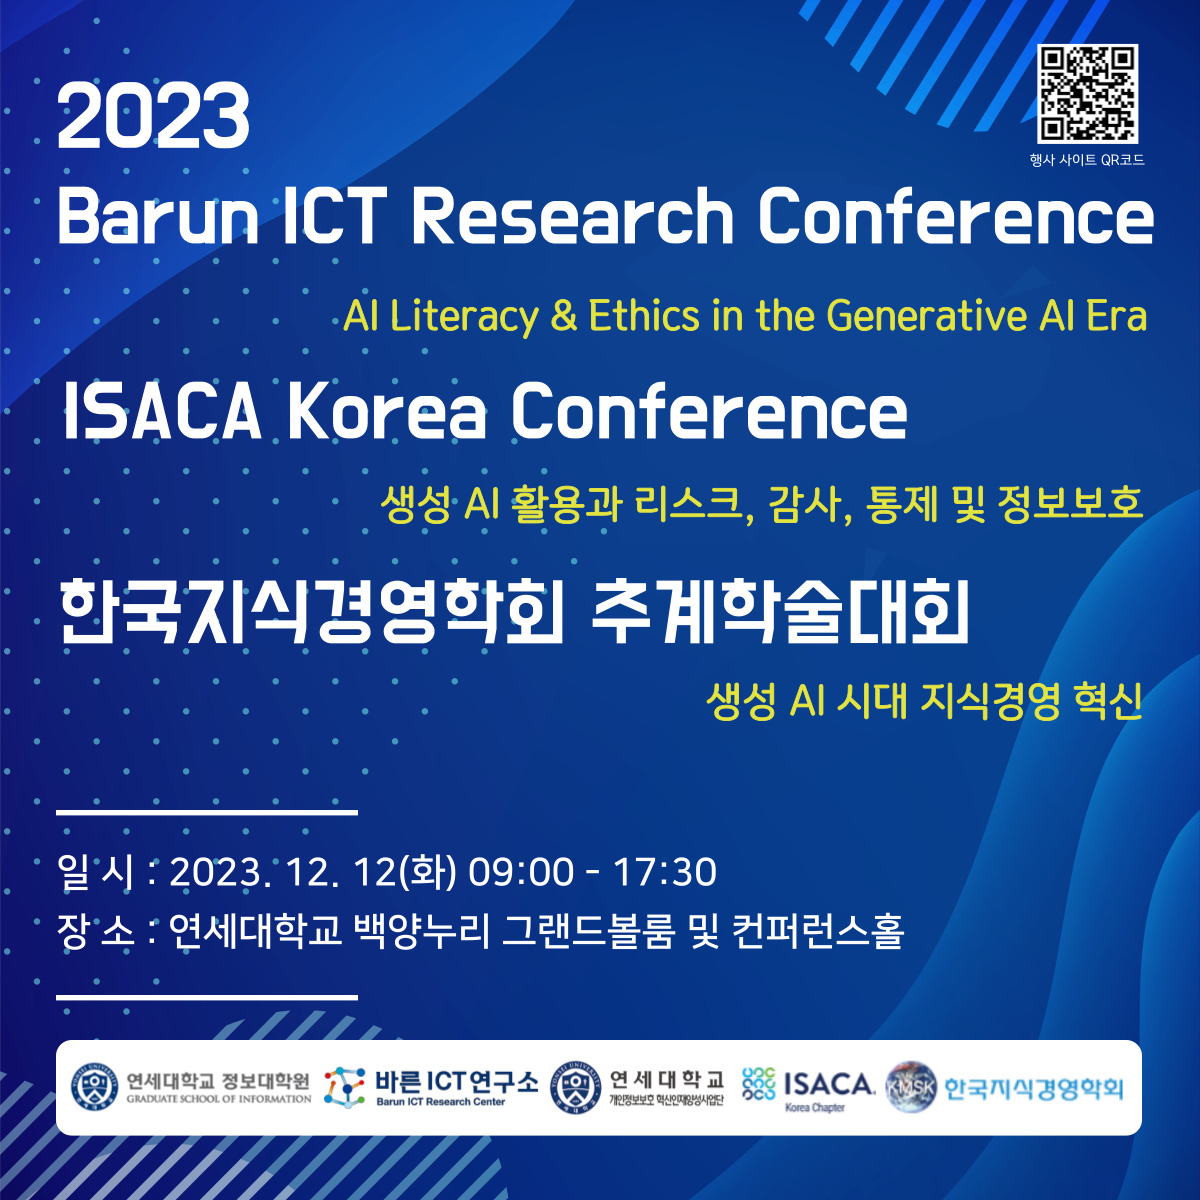 2023 Barun ICT Research Conference